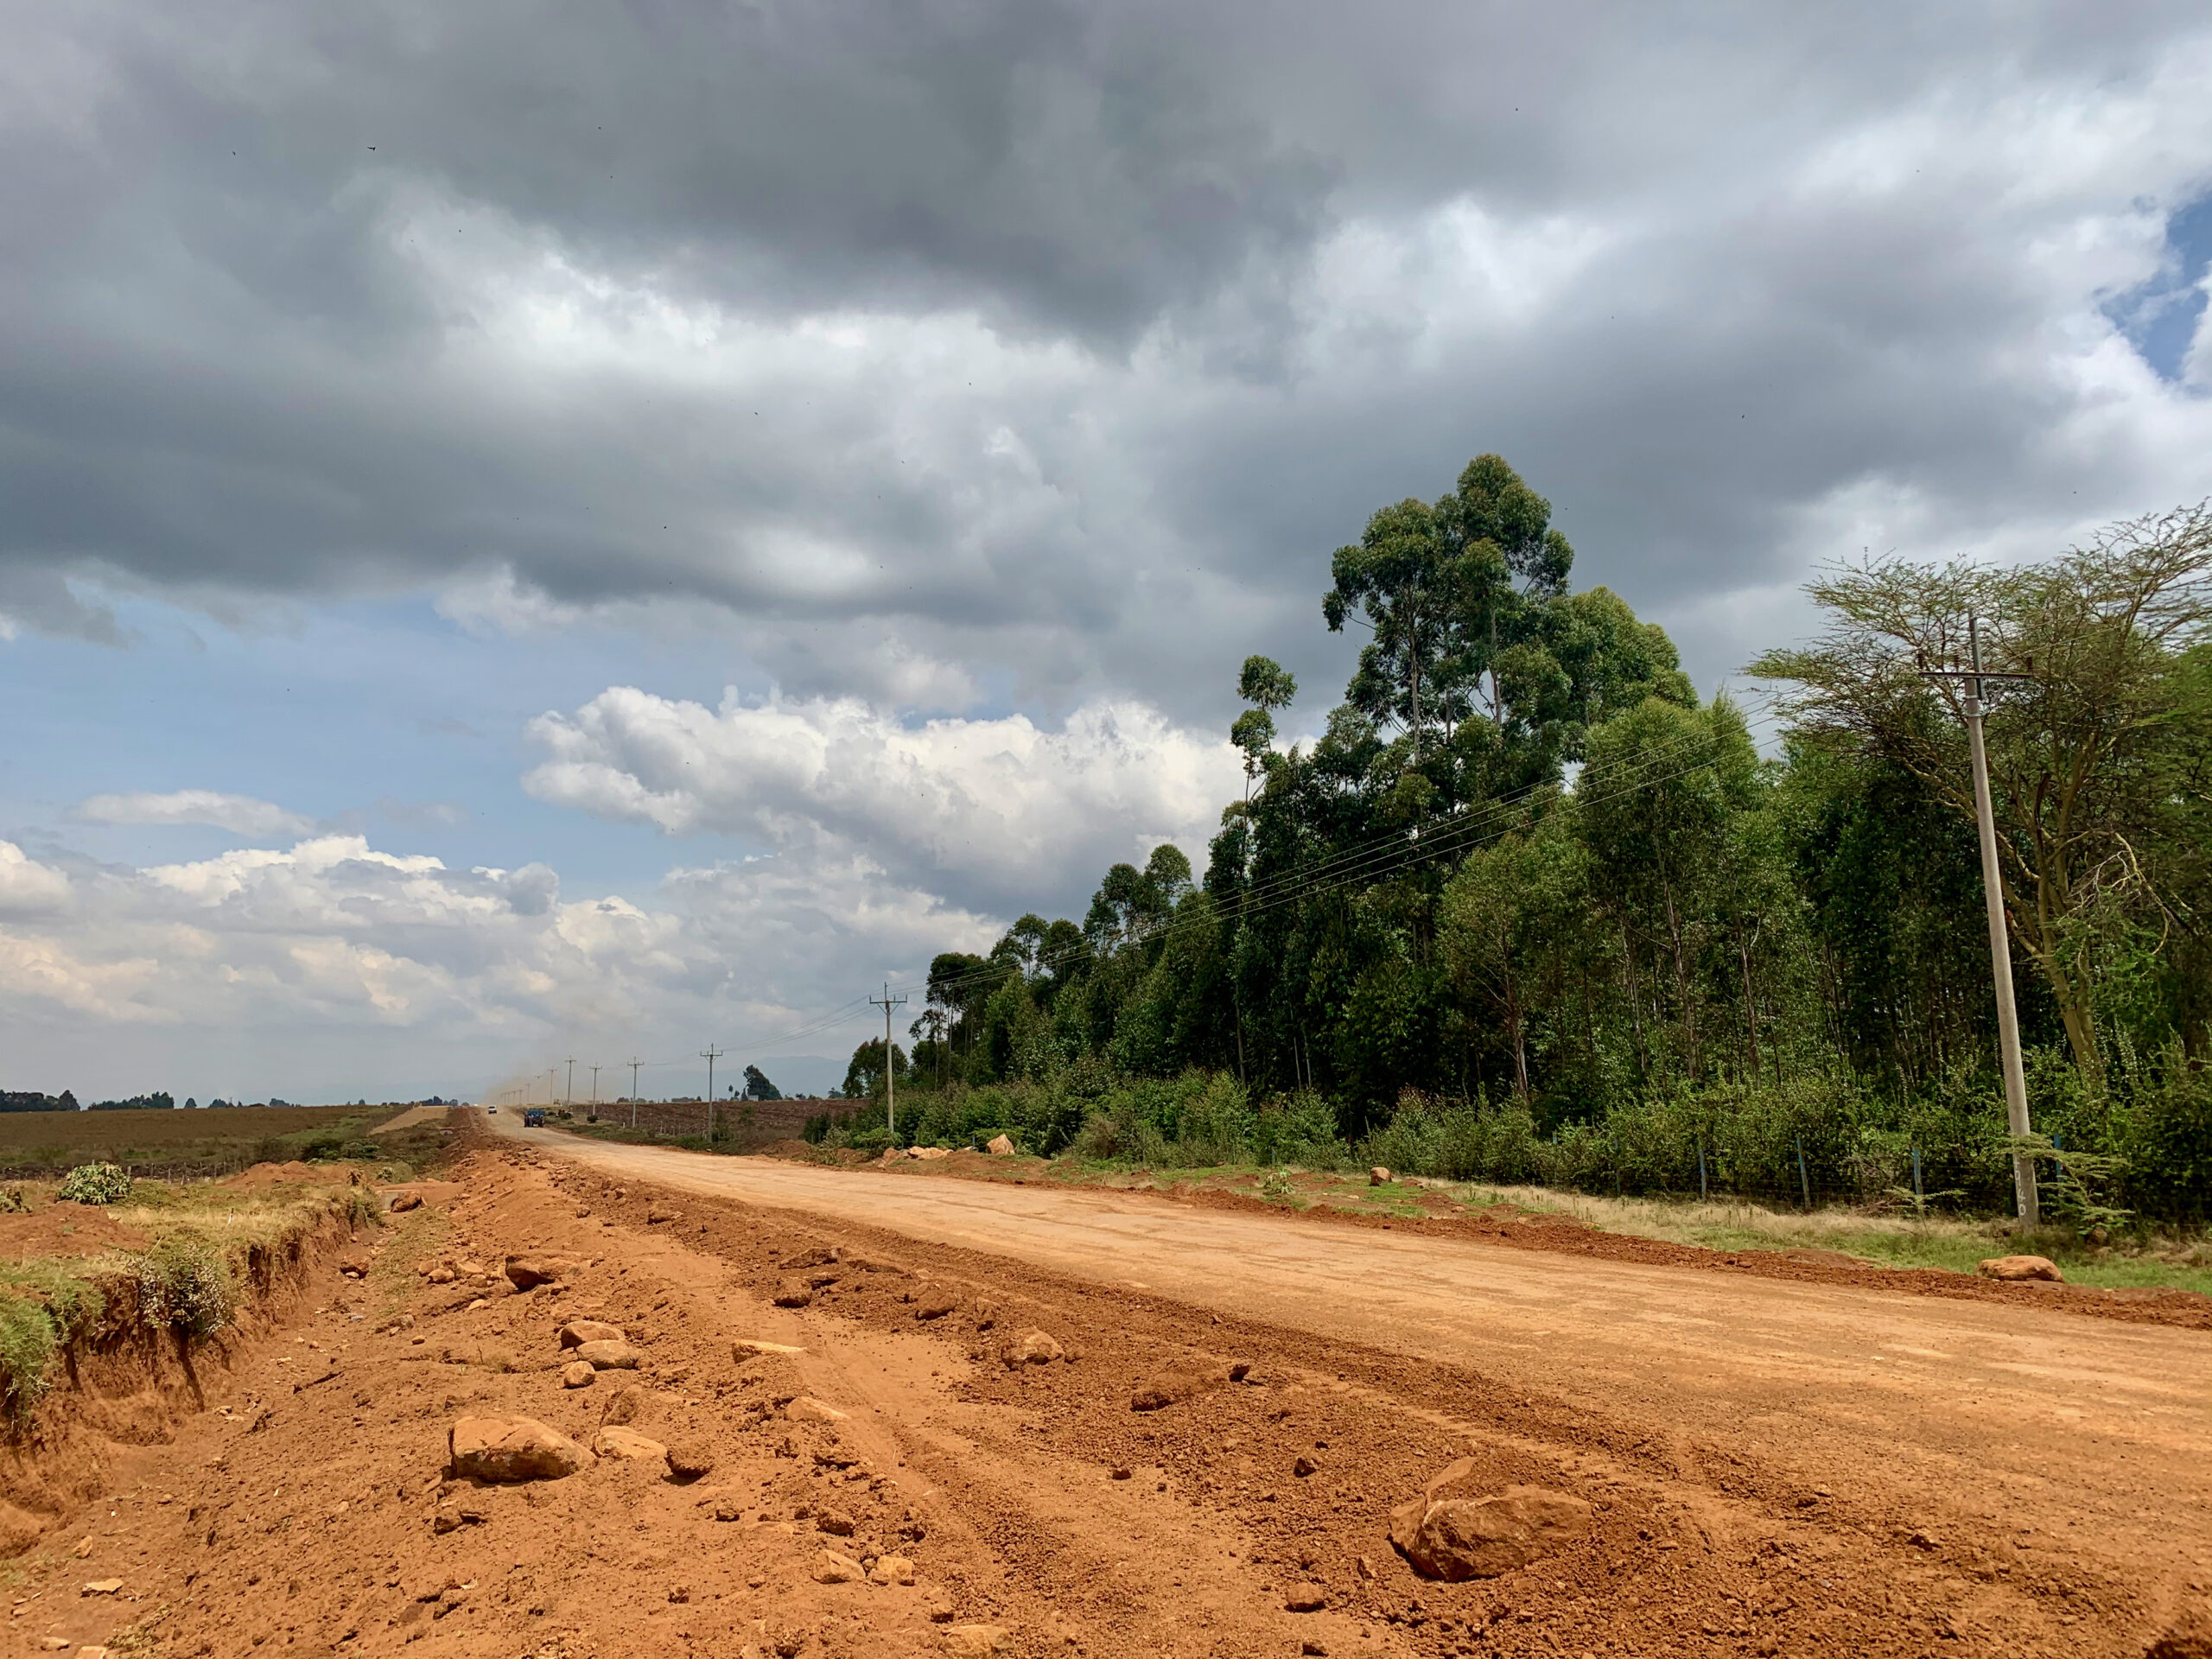 New road in Africa